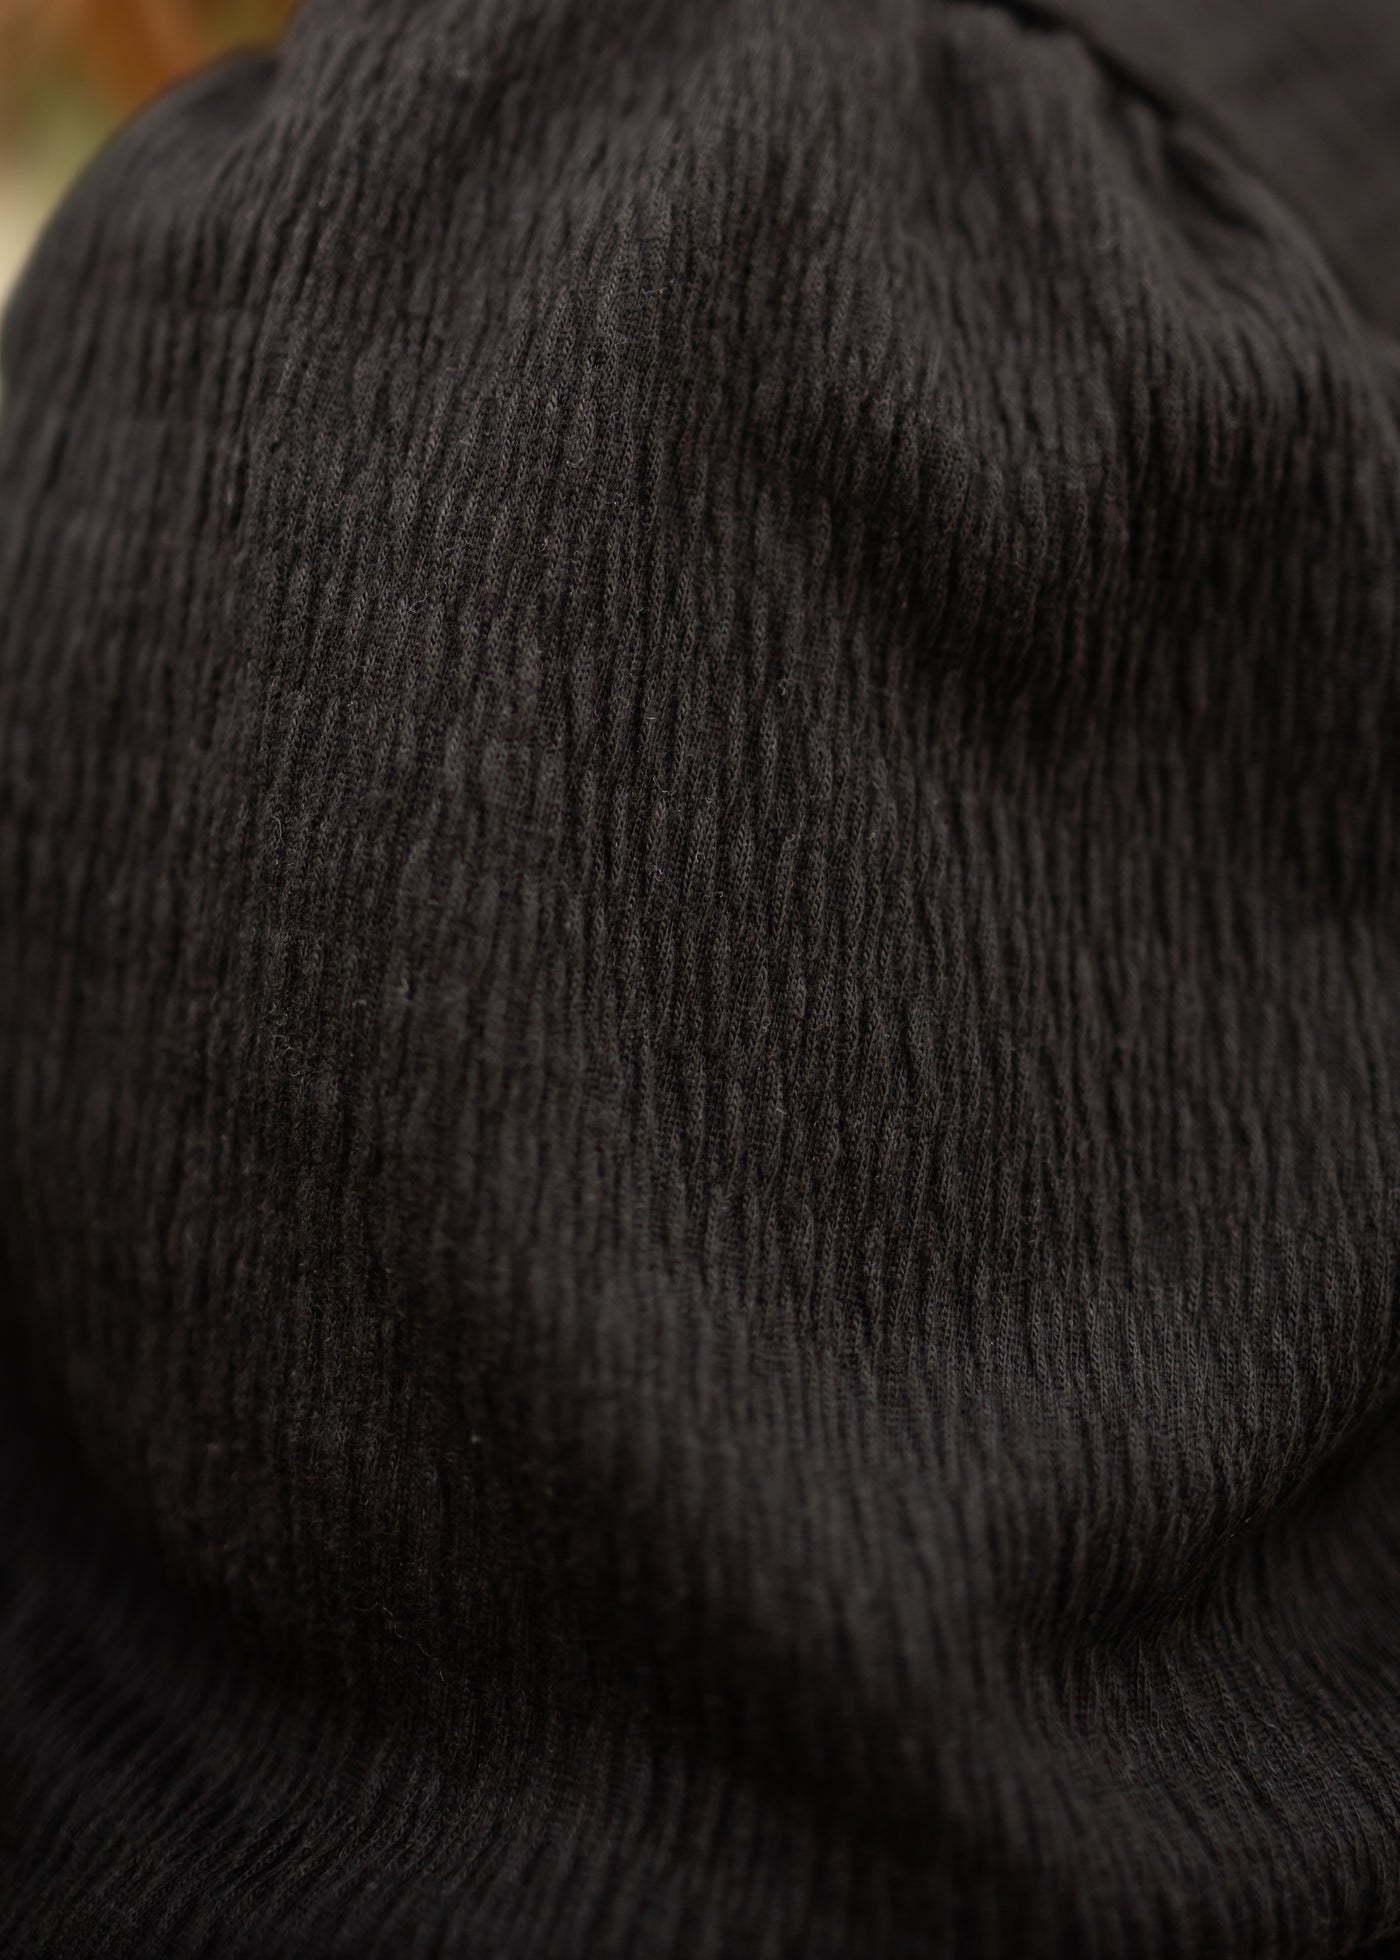 Texture fabric of a black top